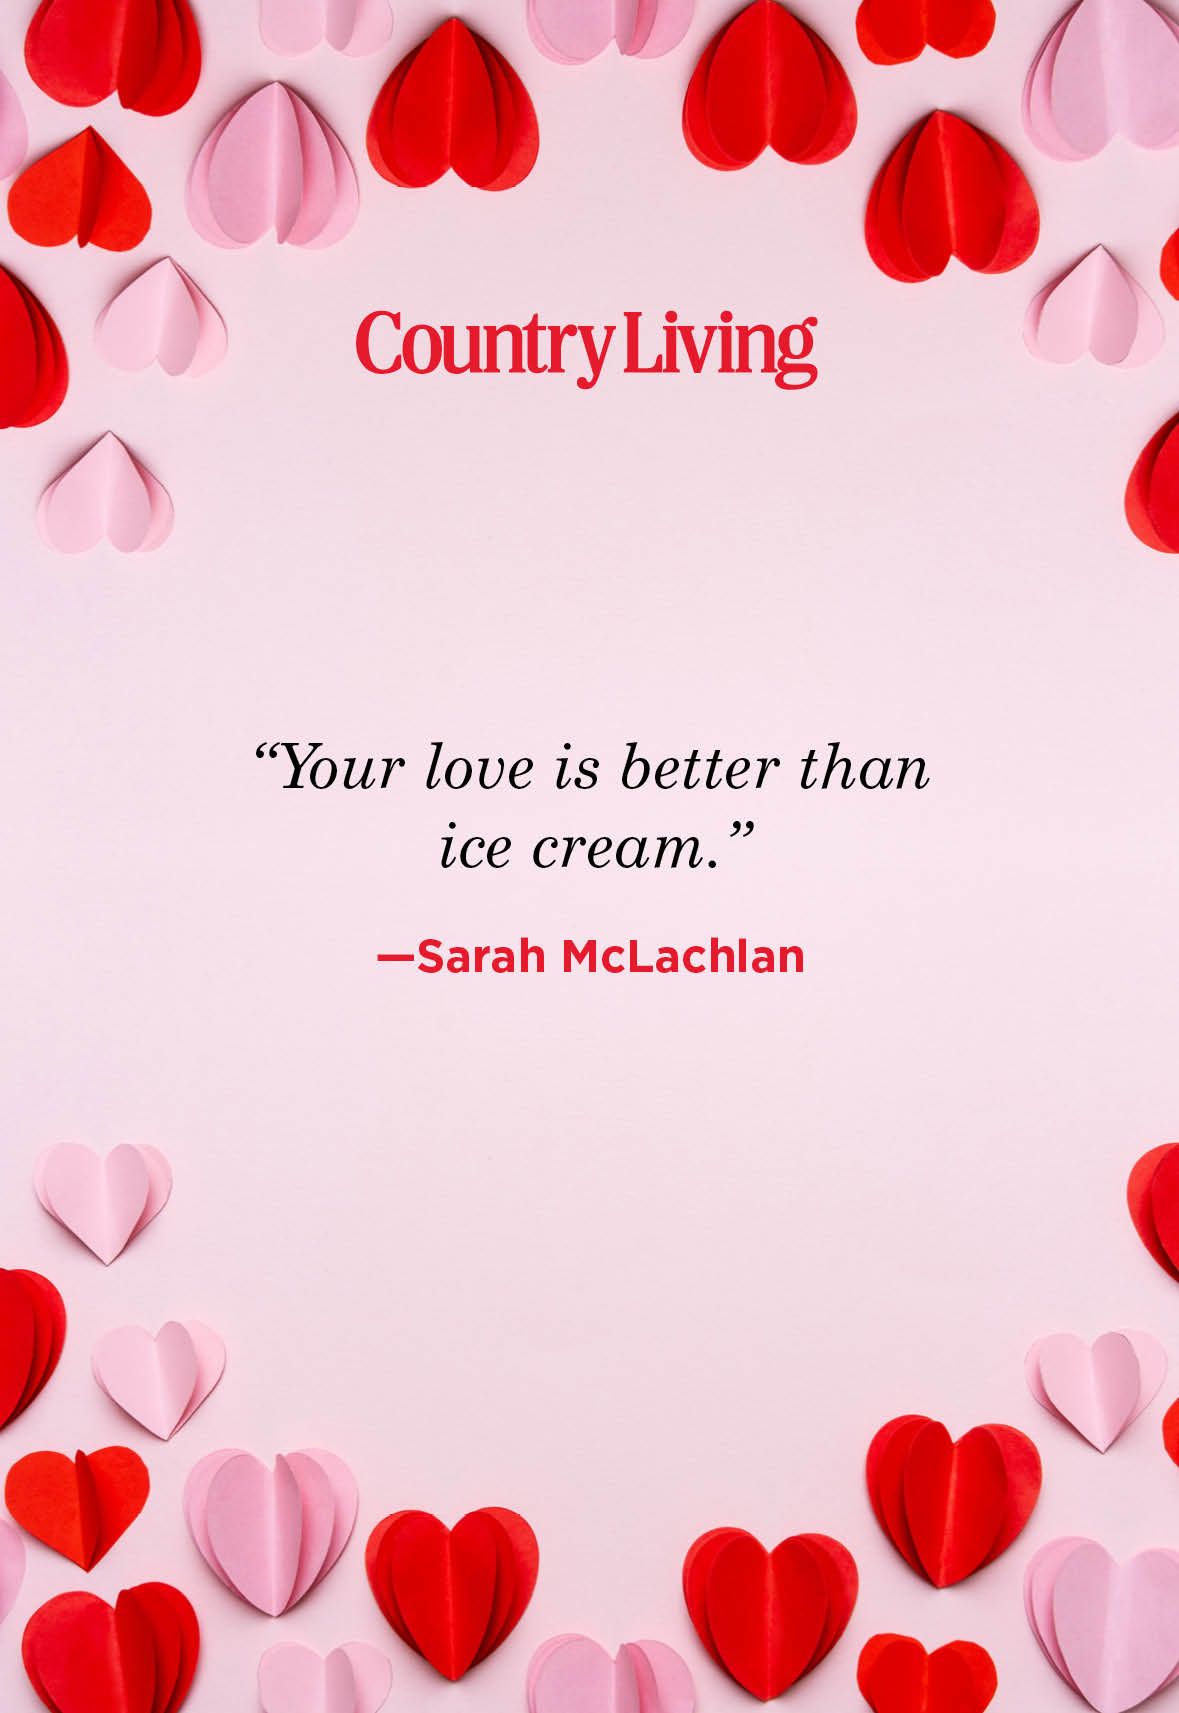 celebrity love quotes and sayings